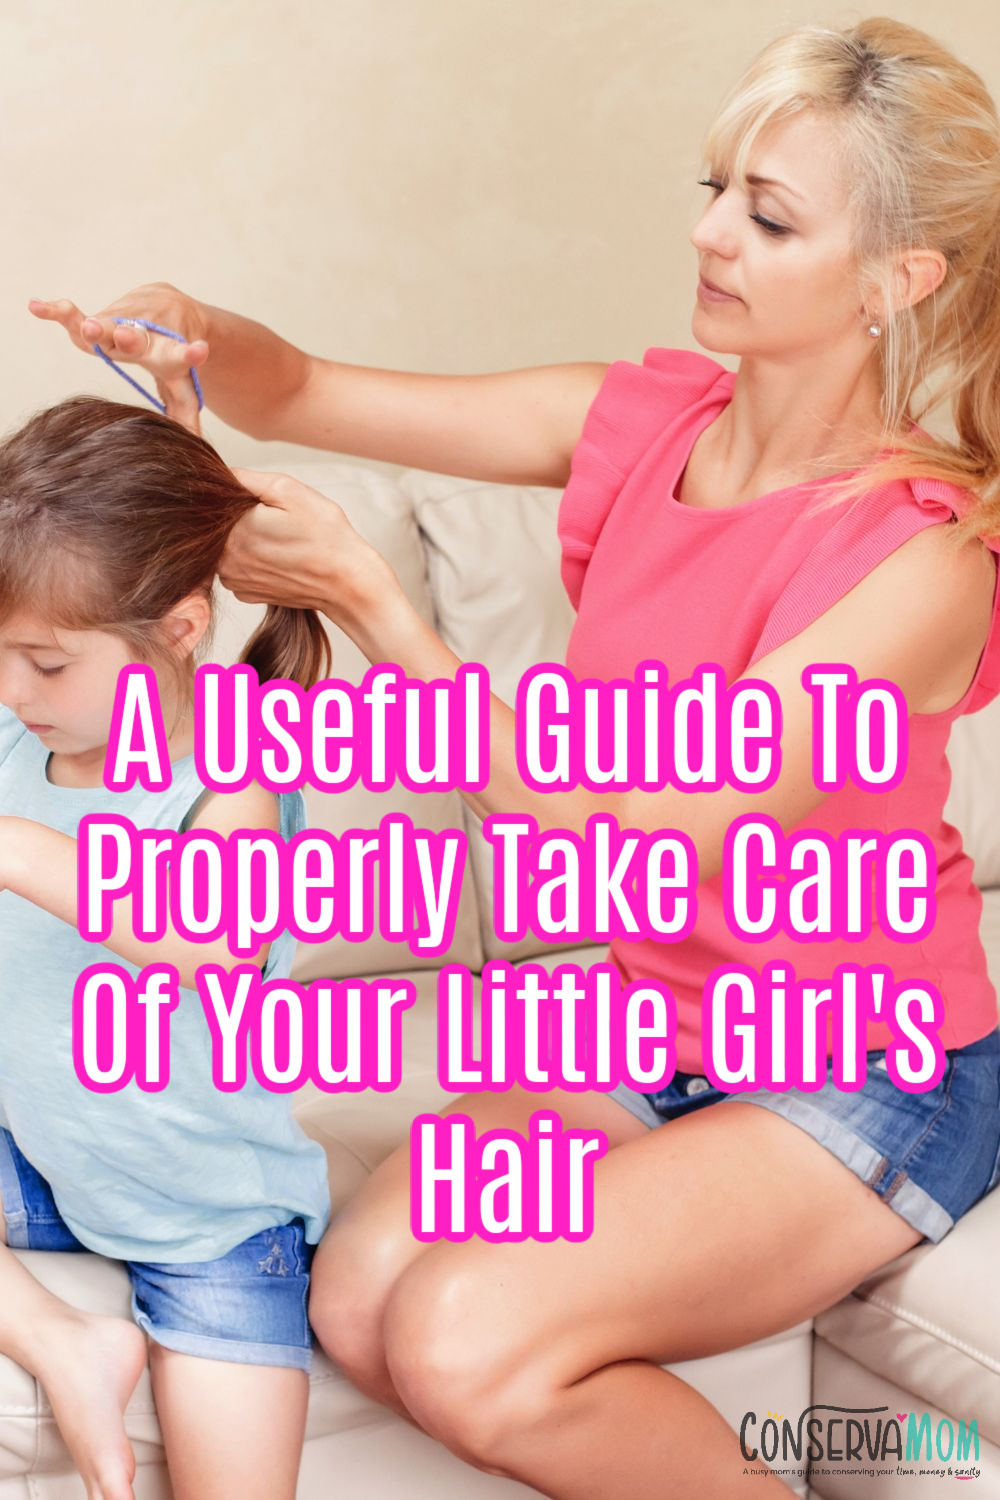 A Useful Guide To Properly Take Care Of Your Little Girl's Hair